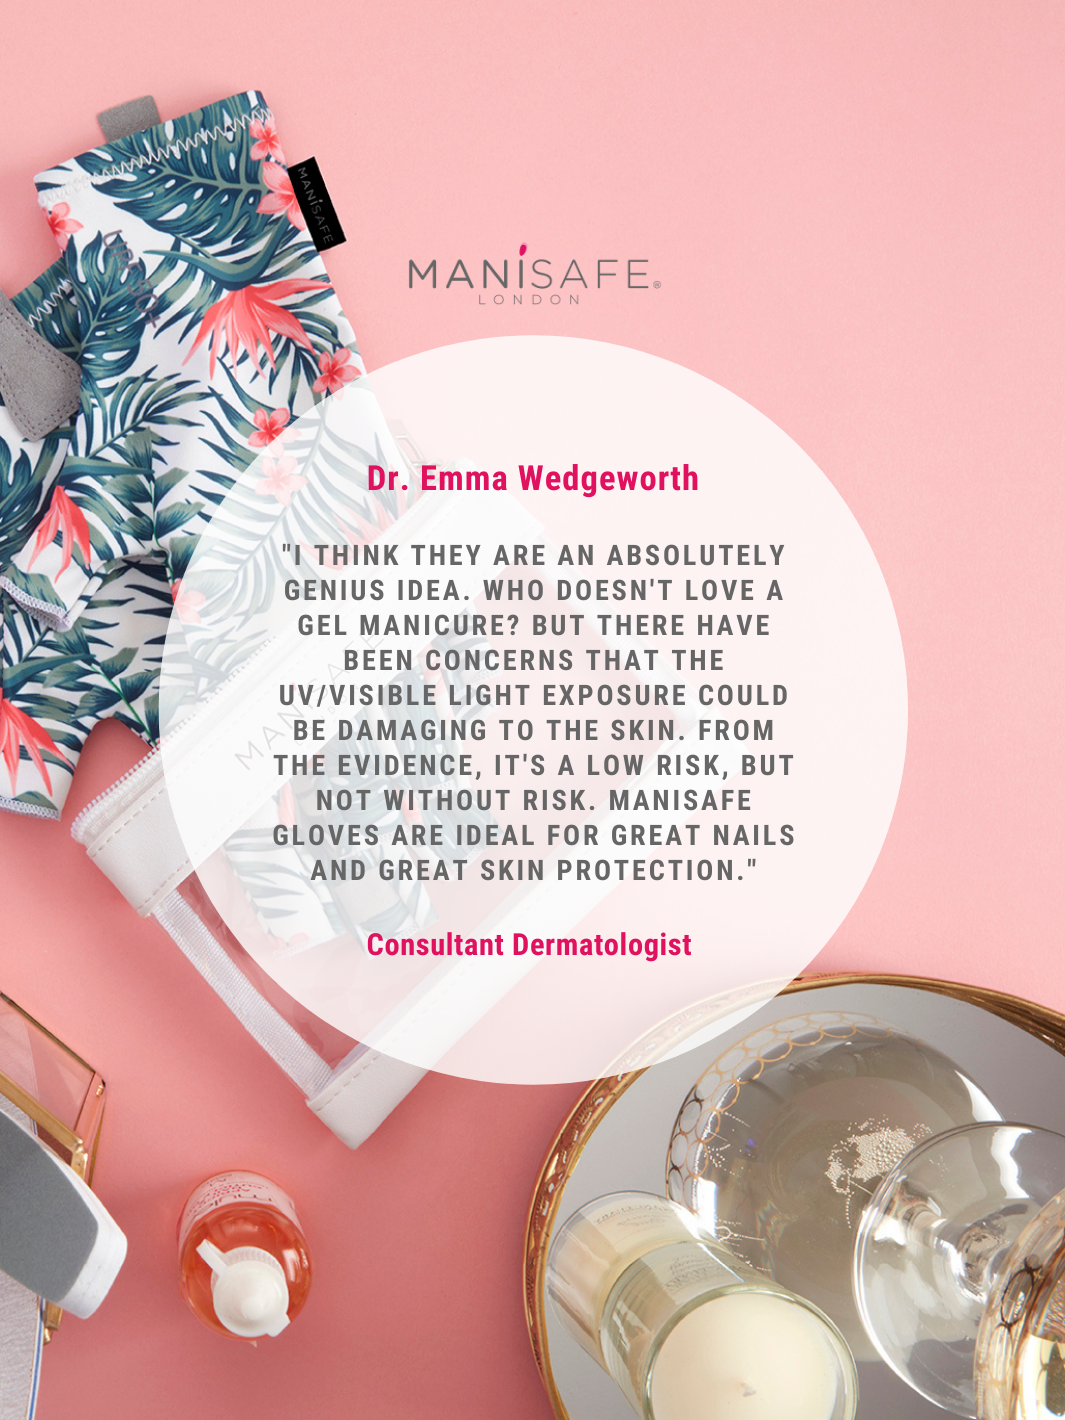 London Consultant Dermatologist Dr. Emma Wedgeworth recommends Manisafe London gloves to protect your hands' skin during gel manicures.